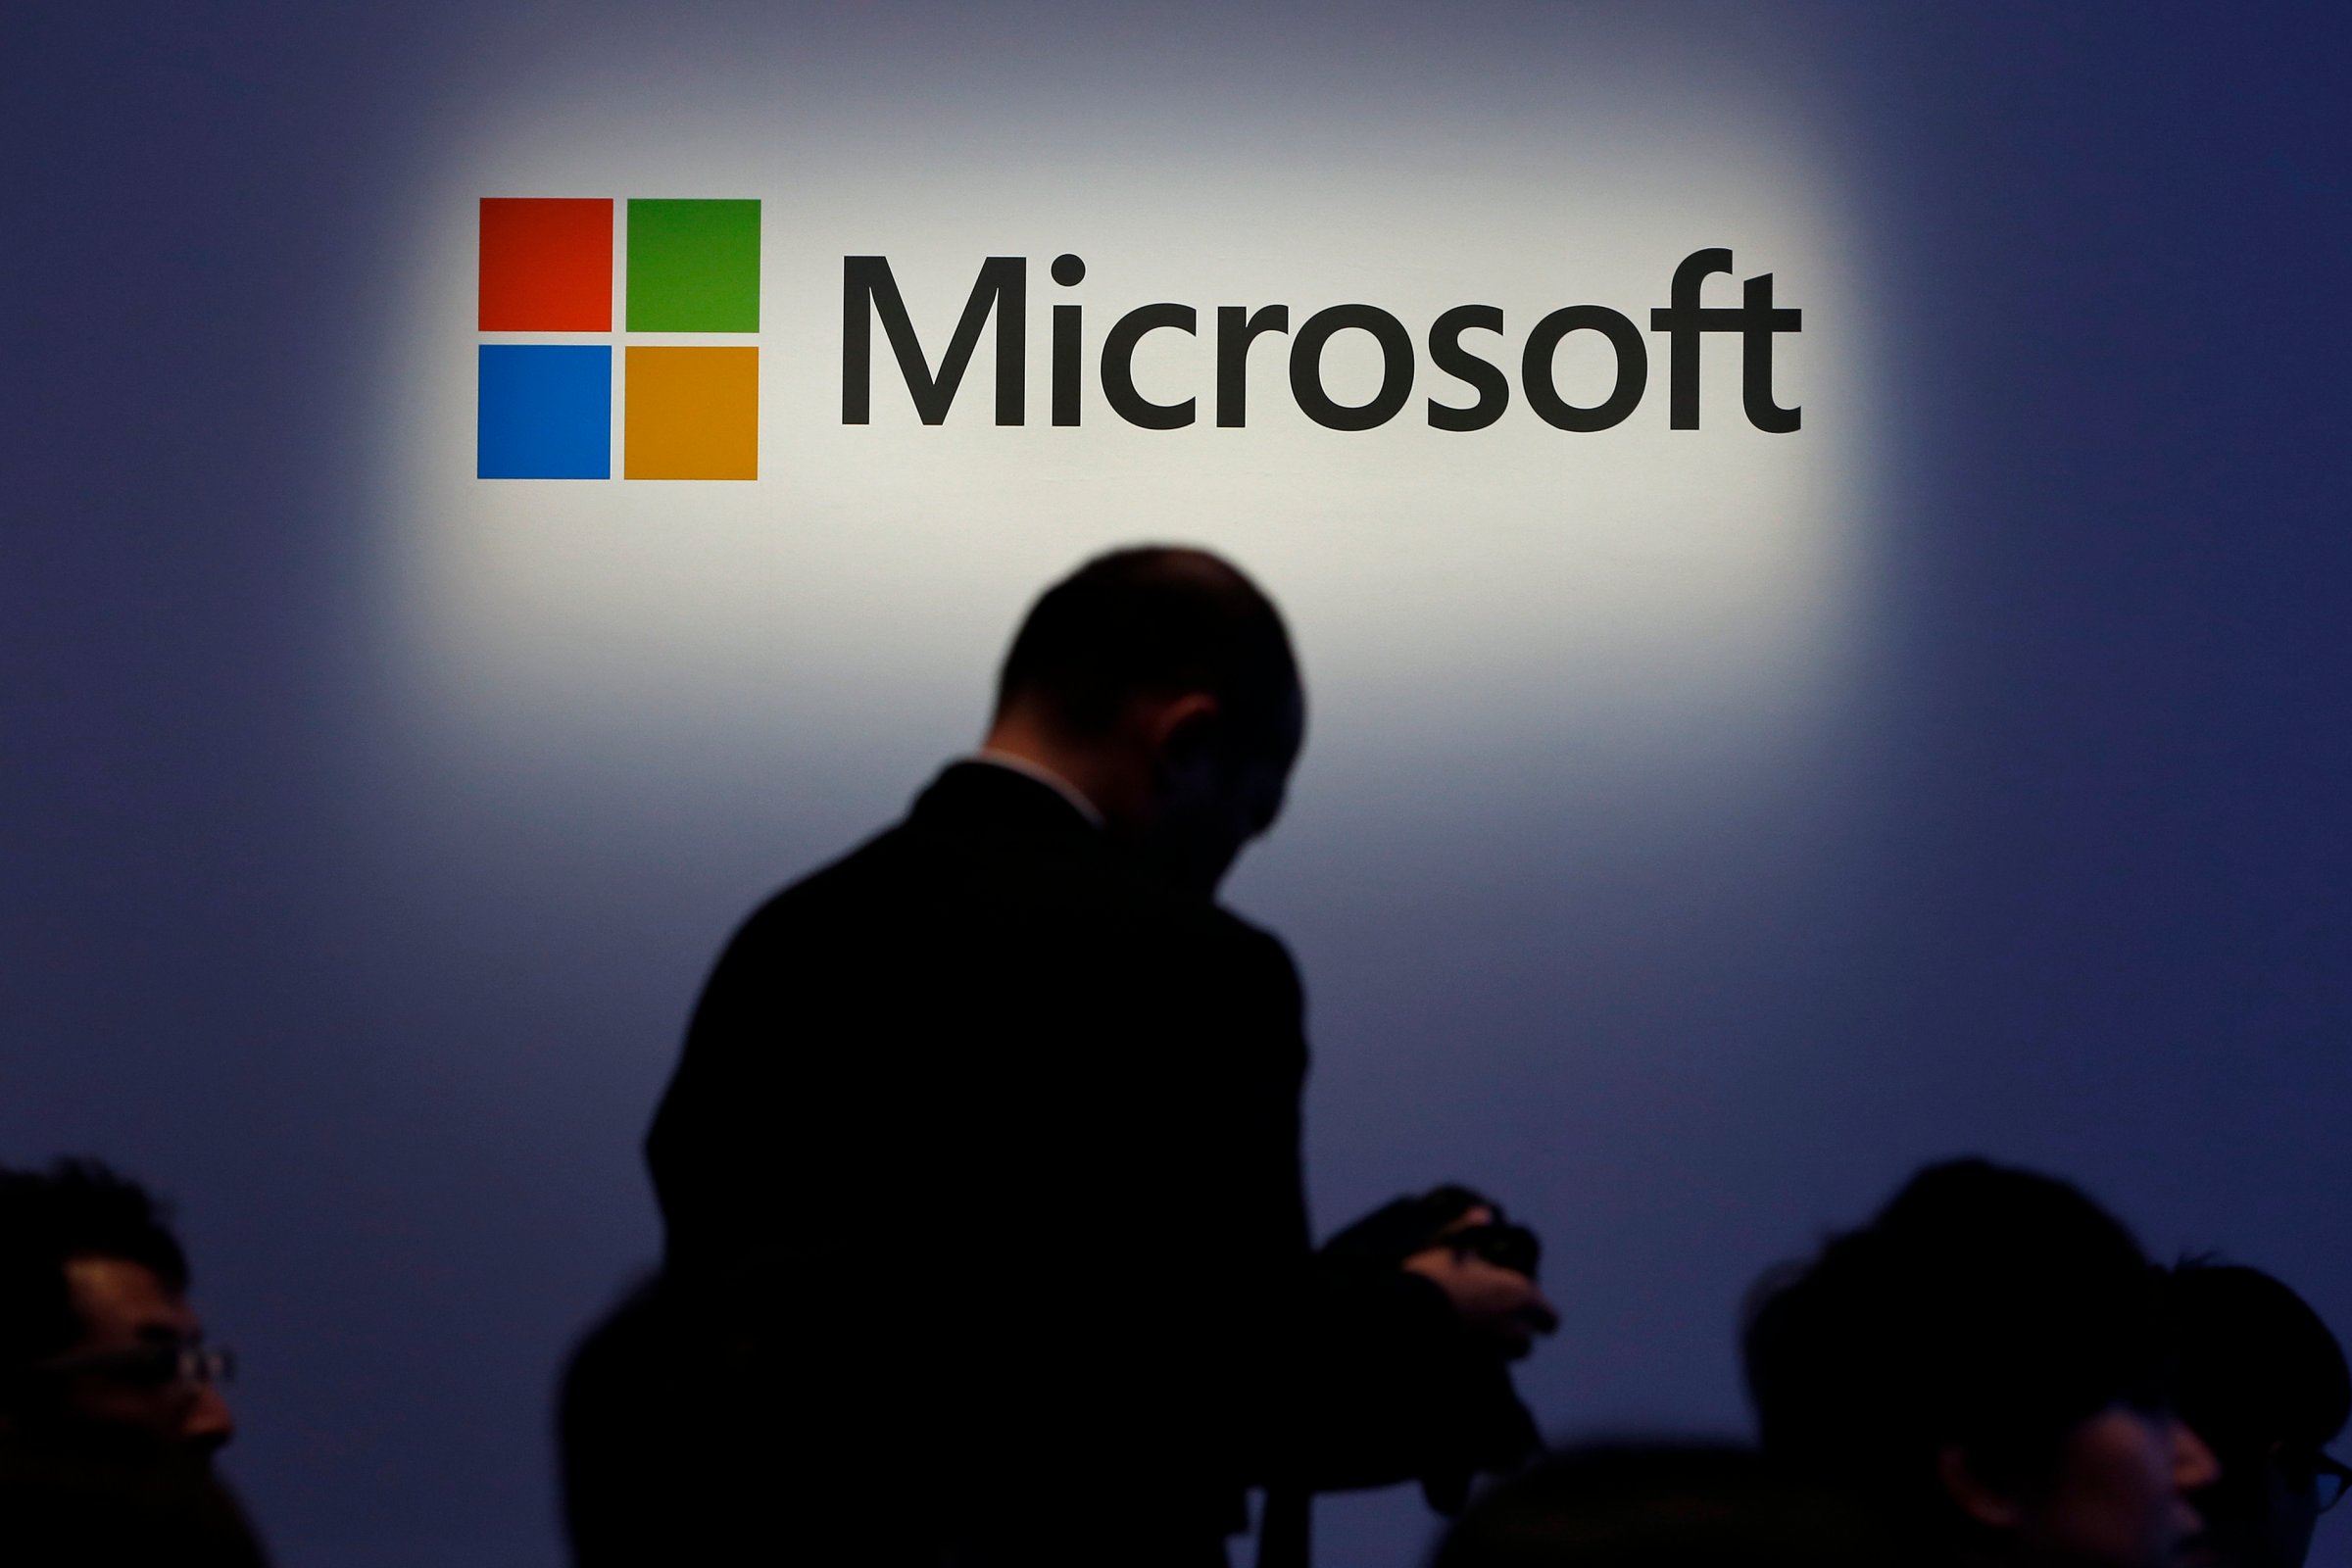 The Microsoft Corp. logo at a launch event for the company's Windows 8.1 operating system in Tokyo, on Oct. 18, 2013.